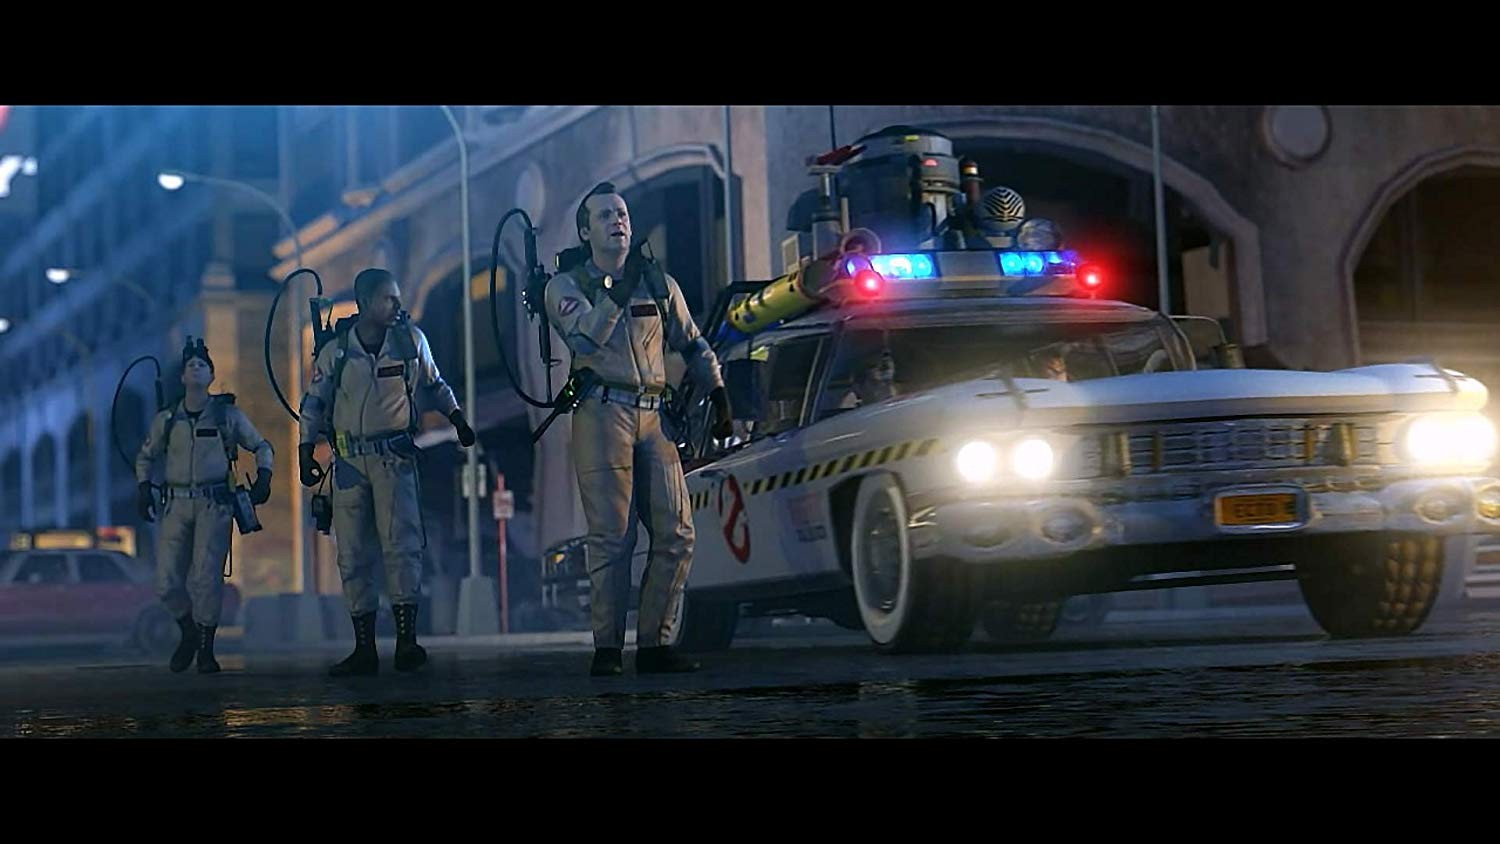 ghostbusters game, ghostbusters: the video game remstered, ps4, playstation 4, switch, nintendo switch, xone, xbox one, au, australia, europe,au, release date, EU, gameplay, features, price, pre-order,mad dog games, saber interactive